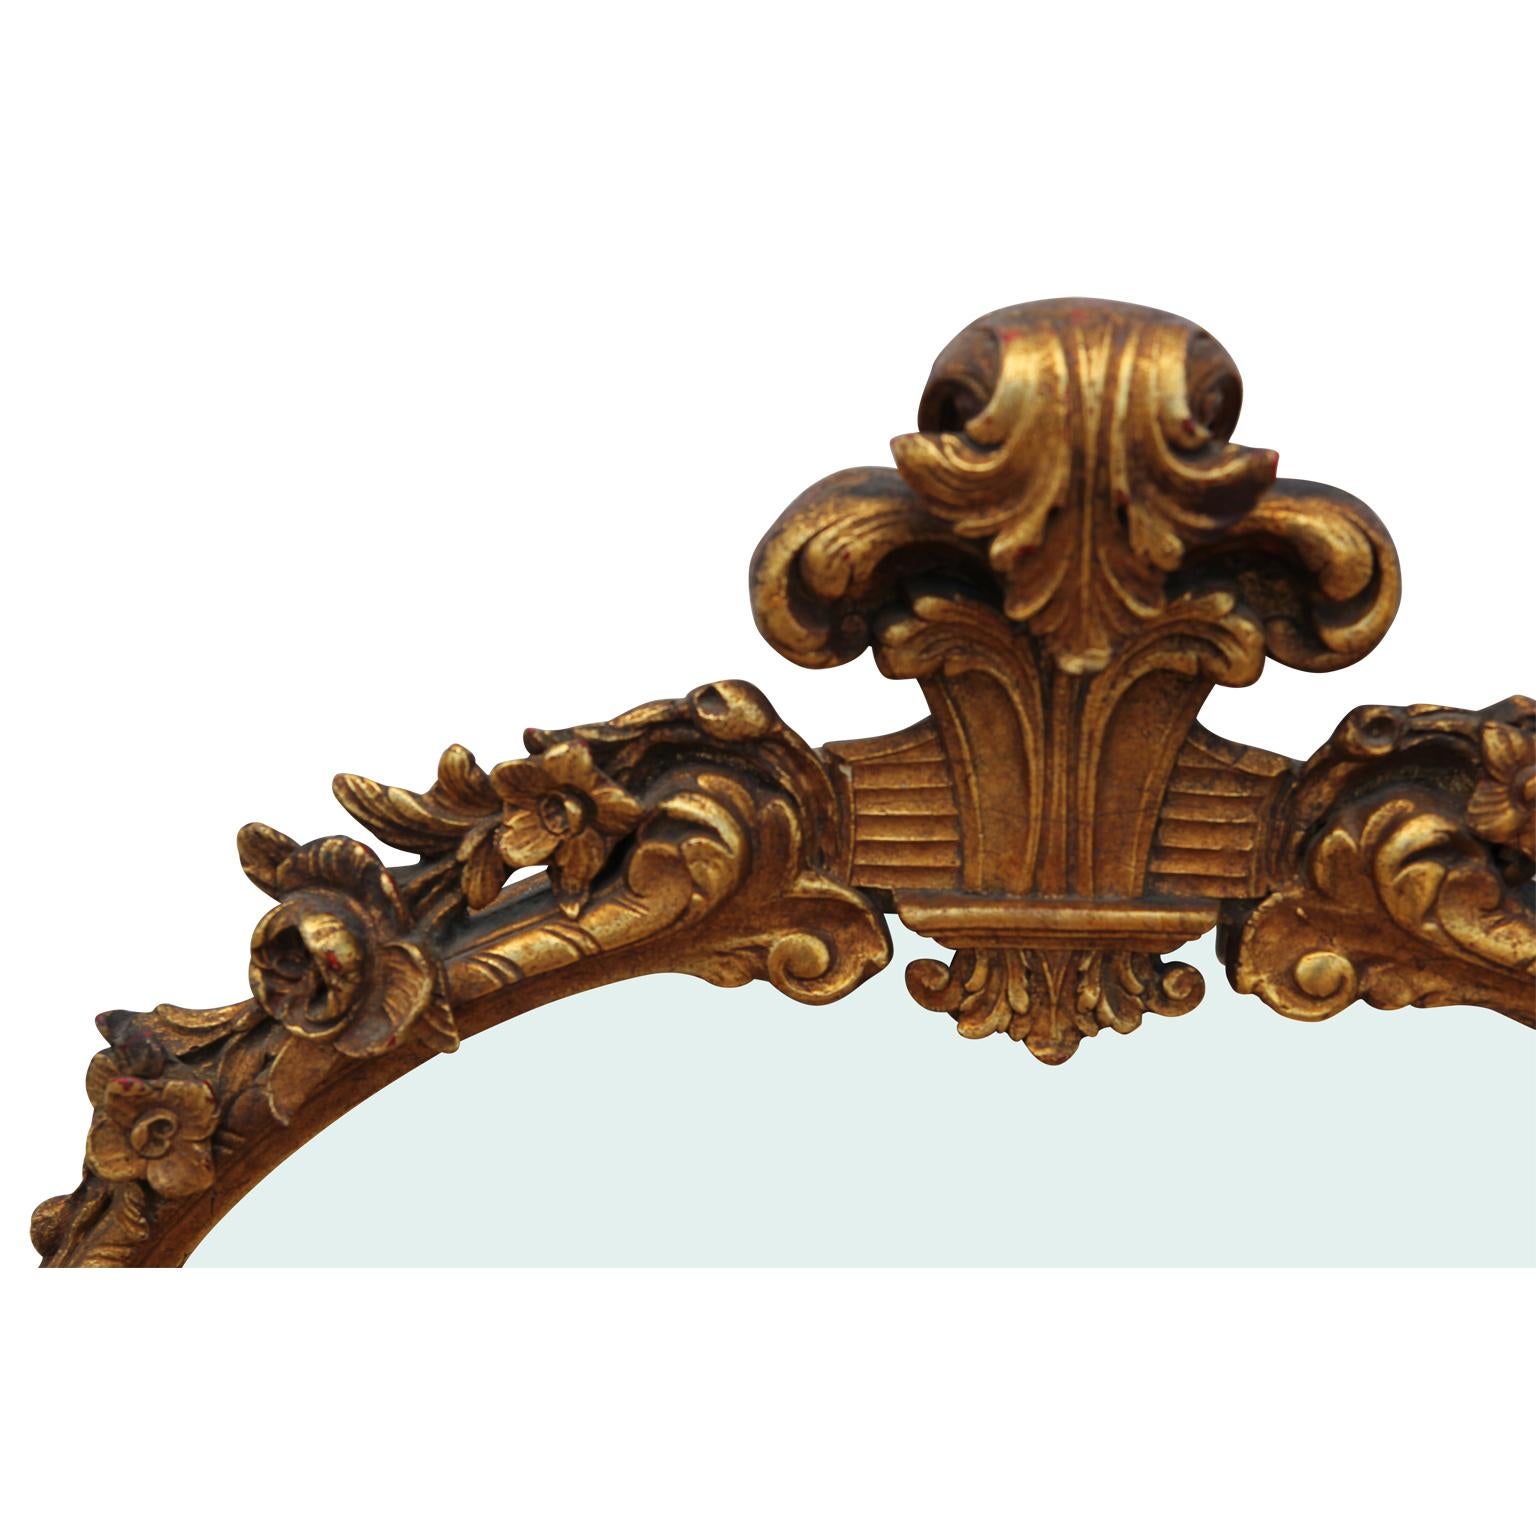 Beautifully gold leafed mirror in the style of a 19th century Italian neoclassical La Barge mirror. The ornate filigree accents add an element of opulence to the design.